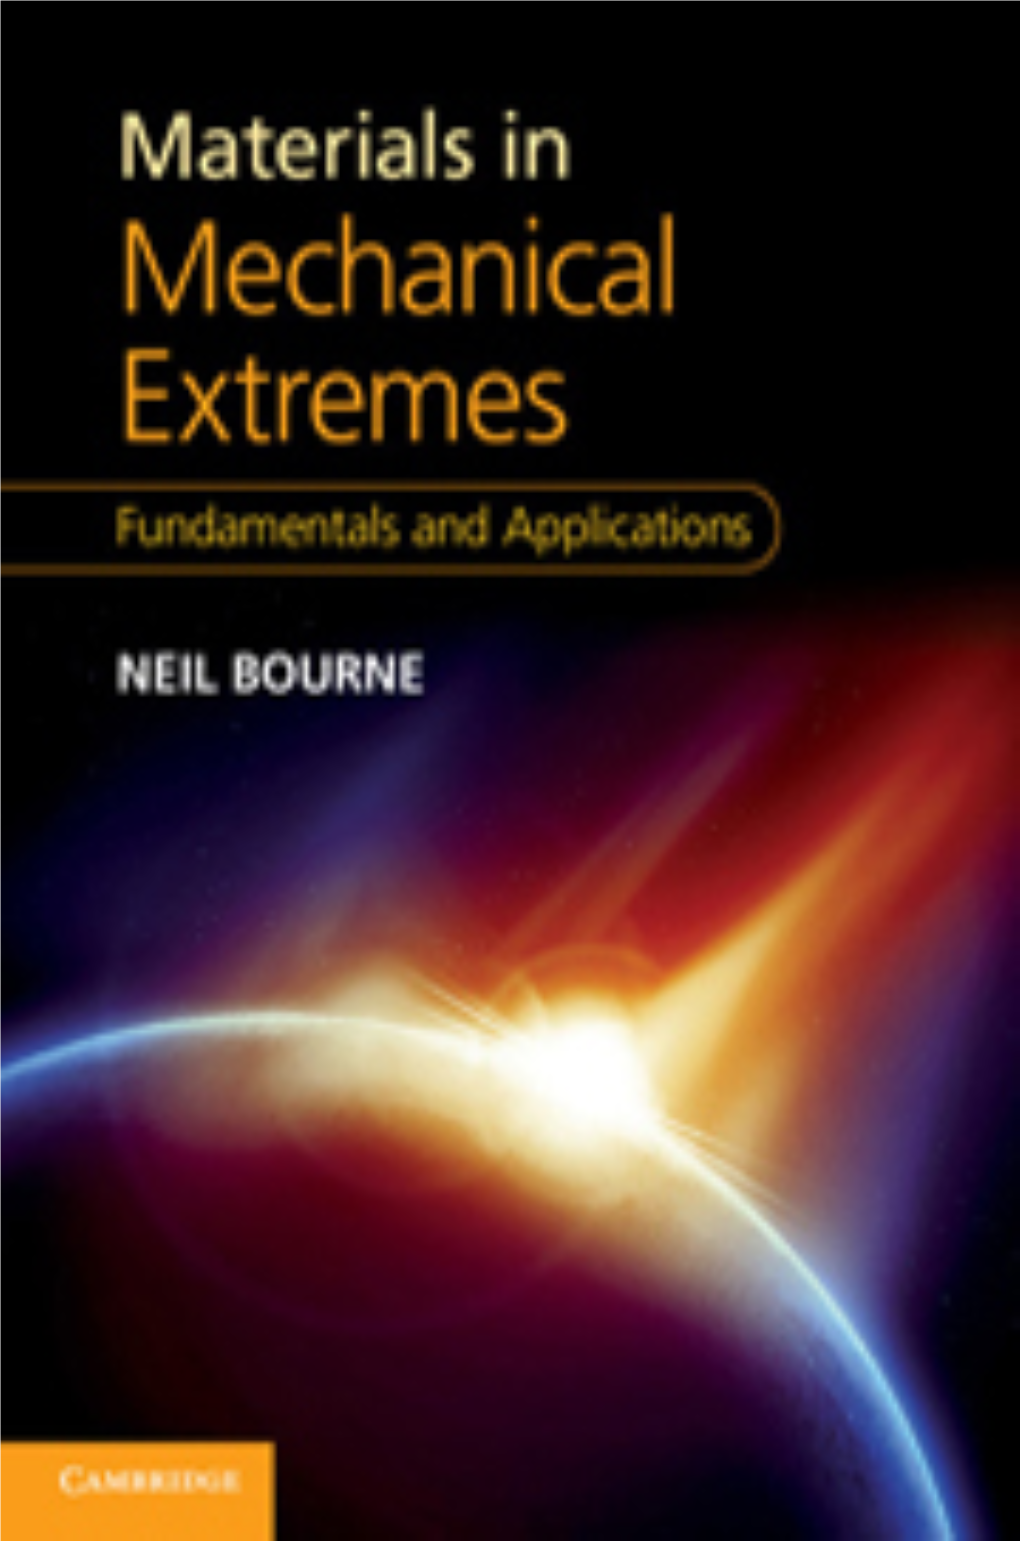 Bourne N. Materials in Mechanical Extremes.. Fundamentals And